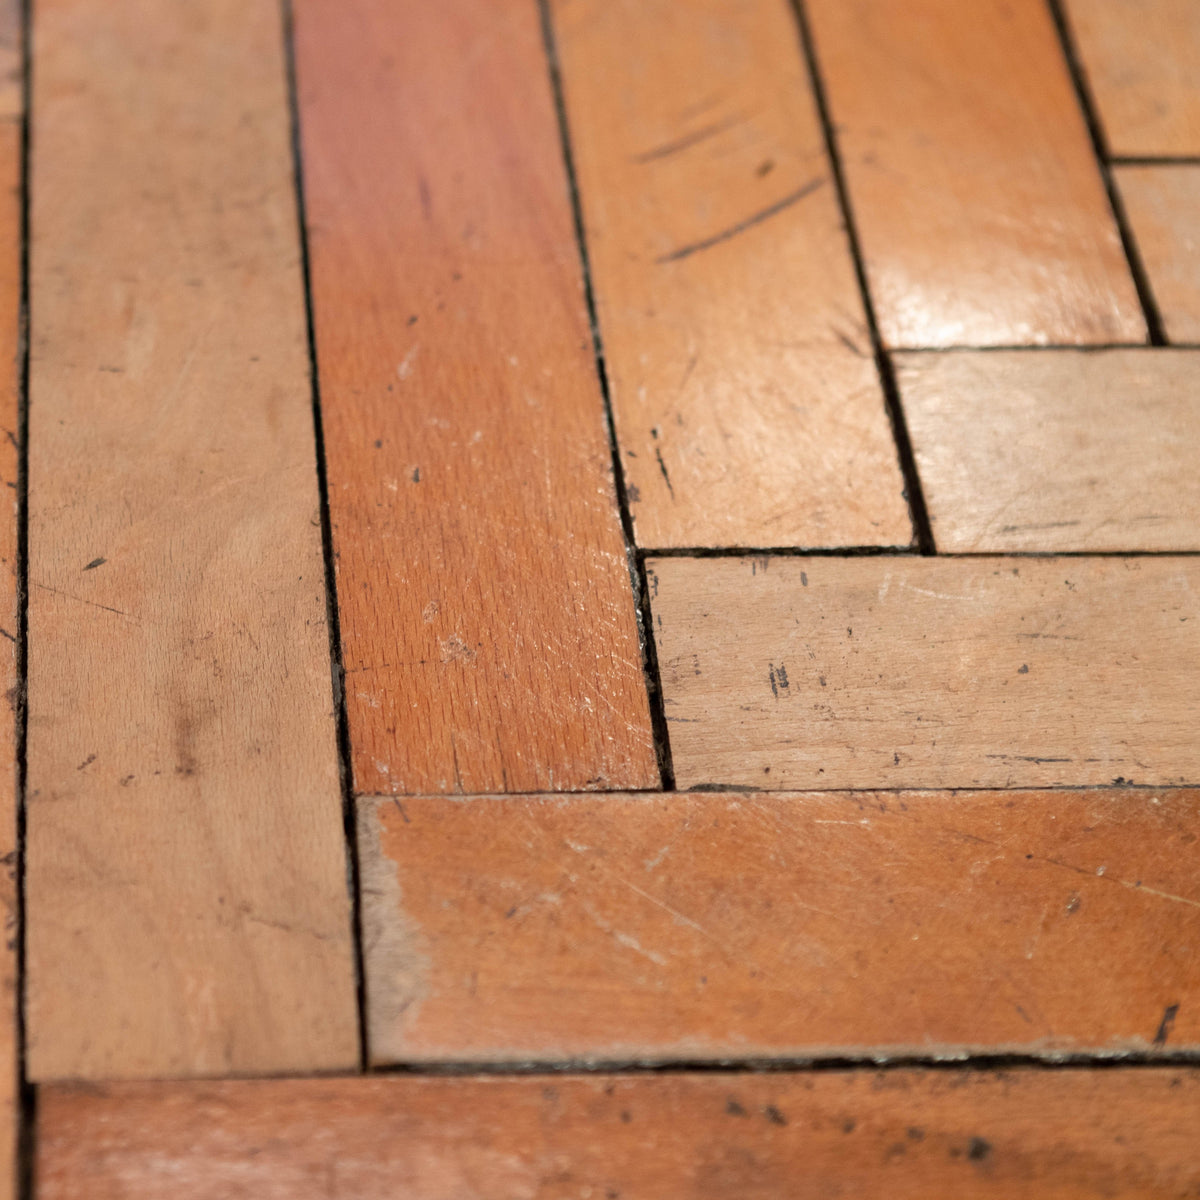 Reclaimed Beech Parquet Flooring 85m² Available | The Architectural Forum